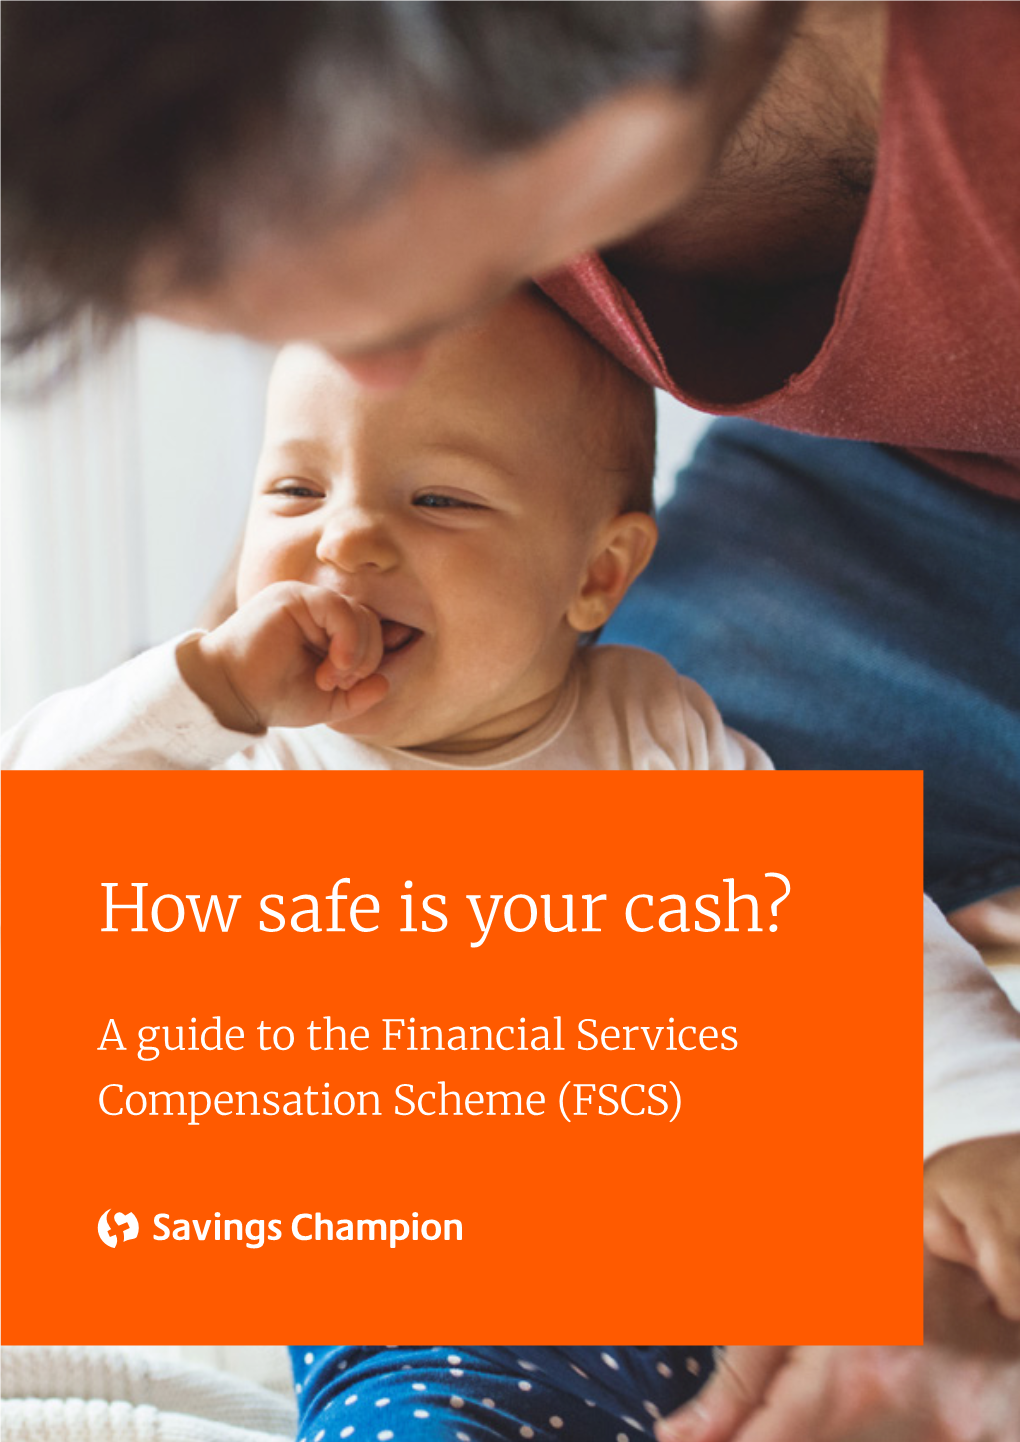 How Safe Is Your Cash?